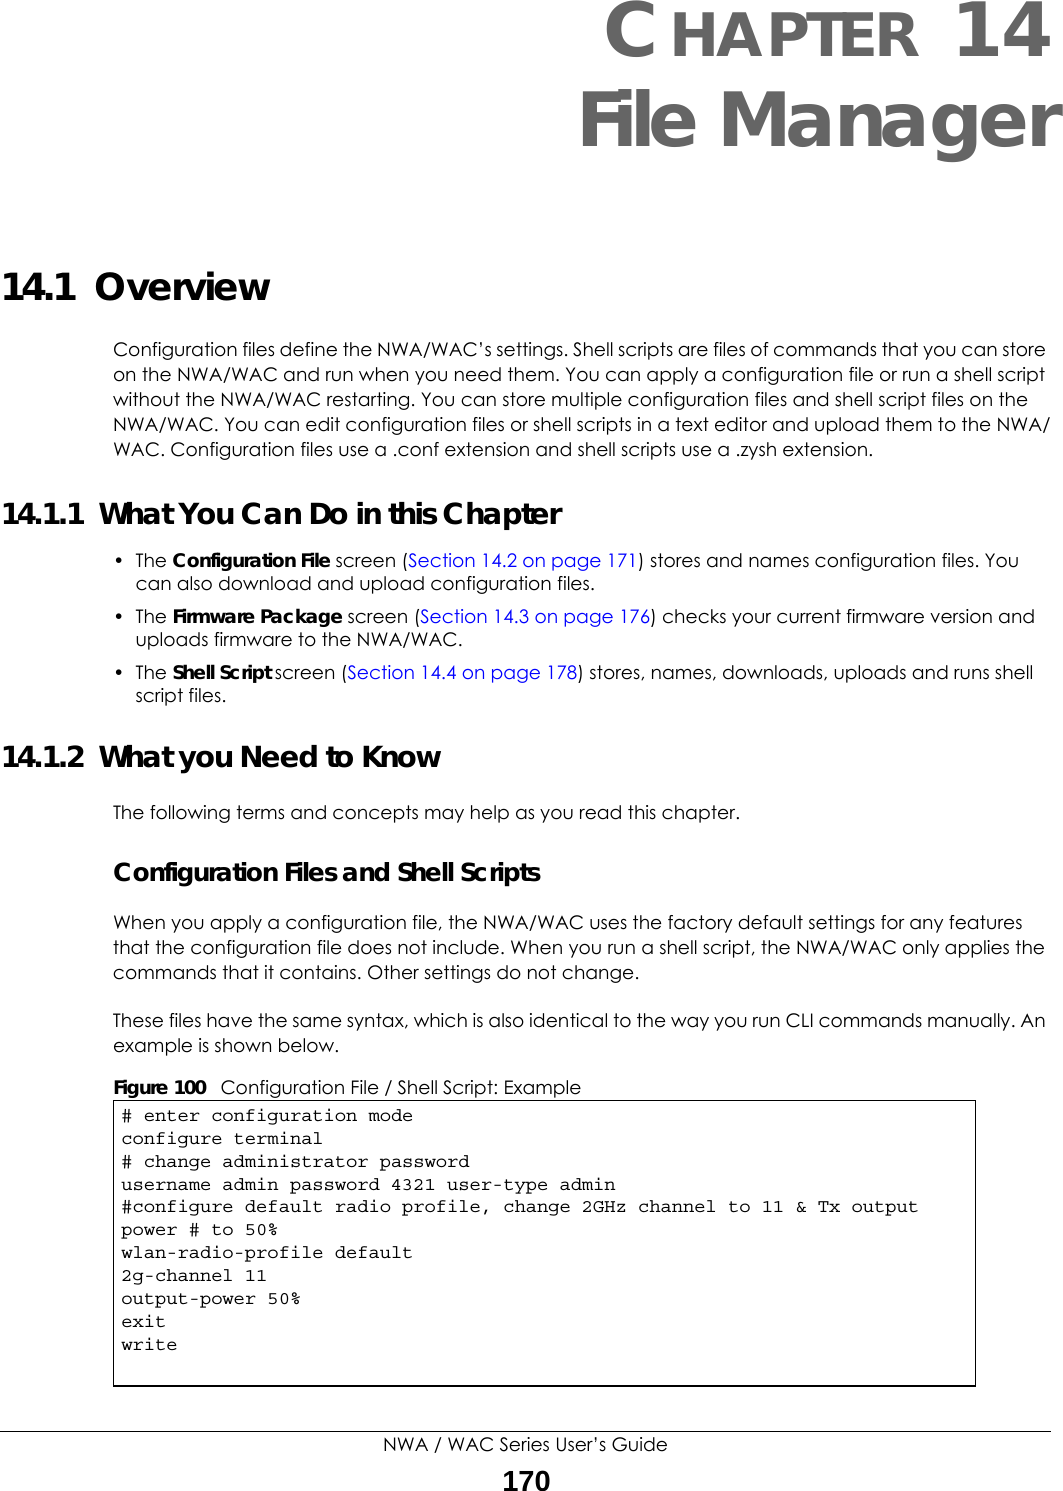 NWA / WAC Series User’s Guide170CHAPTER 14File Manager14.1  OverviewConfiguration files define the NWA/WAC’s settings. Shell scripts are files of commands that you can store on the NWA/WAC and run when you need them. You can apply a configuration file or run a shell script without the NWA/WAC restarting. You can store multiple configuration files and shell script files on the NWA/WAC. You can edit configuration files or shell scripts in a text editor and upload them to the NWA/WAC. Configuration files use a .conf extension and shell scripts use a .zysh extension.14.1.1  What You Can Do in this Chapter• The Configuration File screen (Section 14.2 on page 171) stores and names configuration files. You can also download and upload configuration files.• The Firmware Package screen (Section 14.3 on page 176) checks your current firmware version and uploads firmware to the NWA/WAC.• The Shell Script screen (Section 14.4 on page 178) stores, names, downloads, uploads and runs shell script files. 14.1.2  What you Need to KnowThe following terms and concepts may help as you read this chapter.Configuration Files and Shell ScriptsWhen you apply a configuration file, the NWA/WAC uses the factory default settings for any features that the configuration file does not include. When you run a shell script, the NWA/WAC only applies the commands that it contains. Other settings do not change.These files have the same syntax, which is also identical to the way you run CLI commands manually. An example is shown below.  Figure 100   Configuration File / Shell Script: Example# enter configuration modeconfigure terminal# change administrator passwordusername admin password 4321 user-type admin#configure default radio profile, change 2GHz channel to 11 &amp; Tx output power # to 50%wlan-radio-profile default2g-channel 11output-power 50%exitwrite